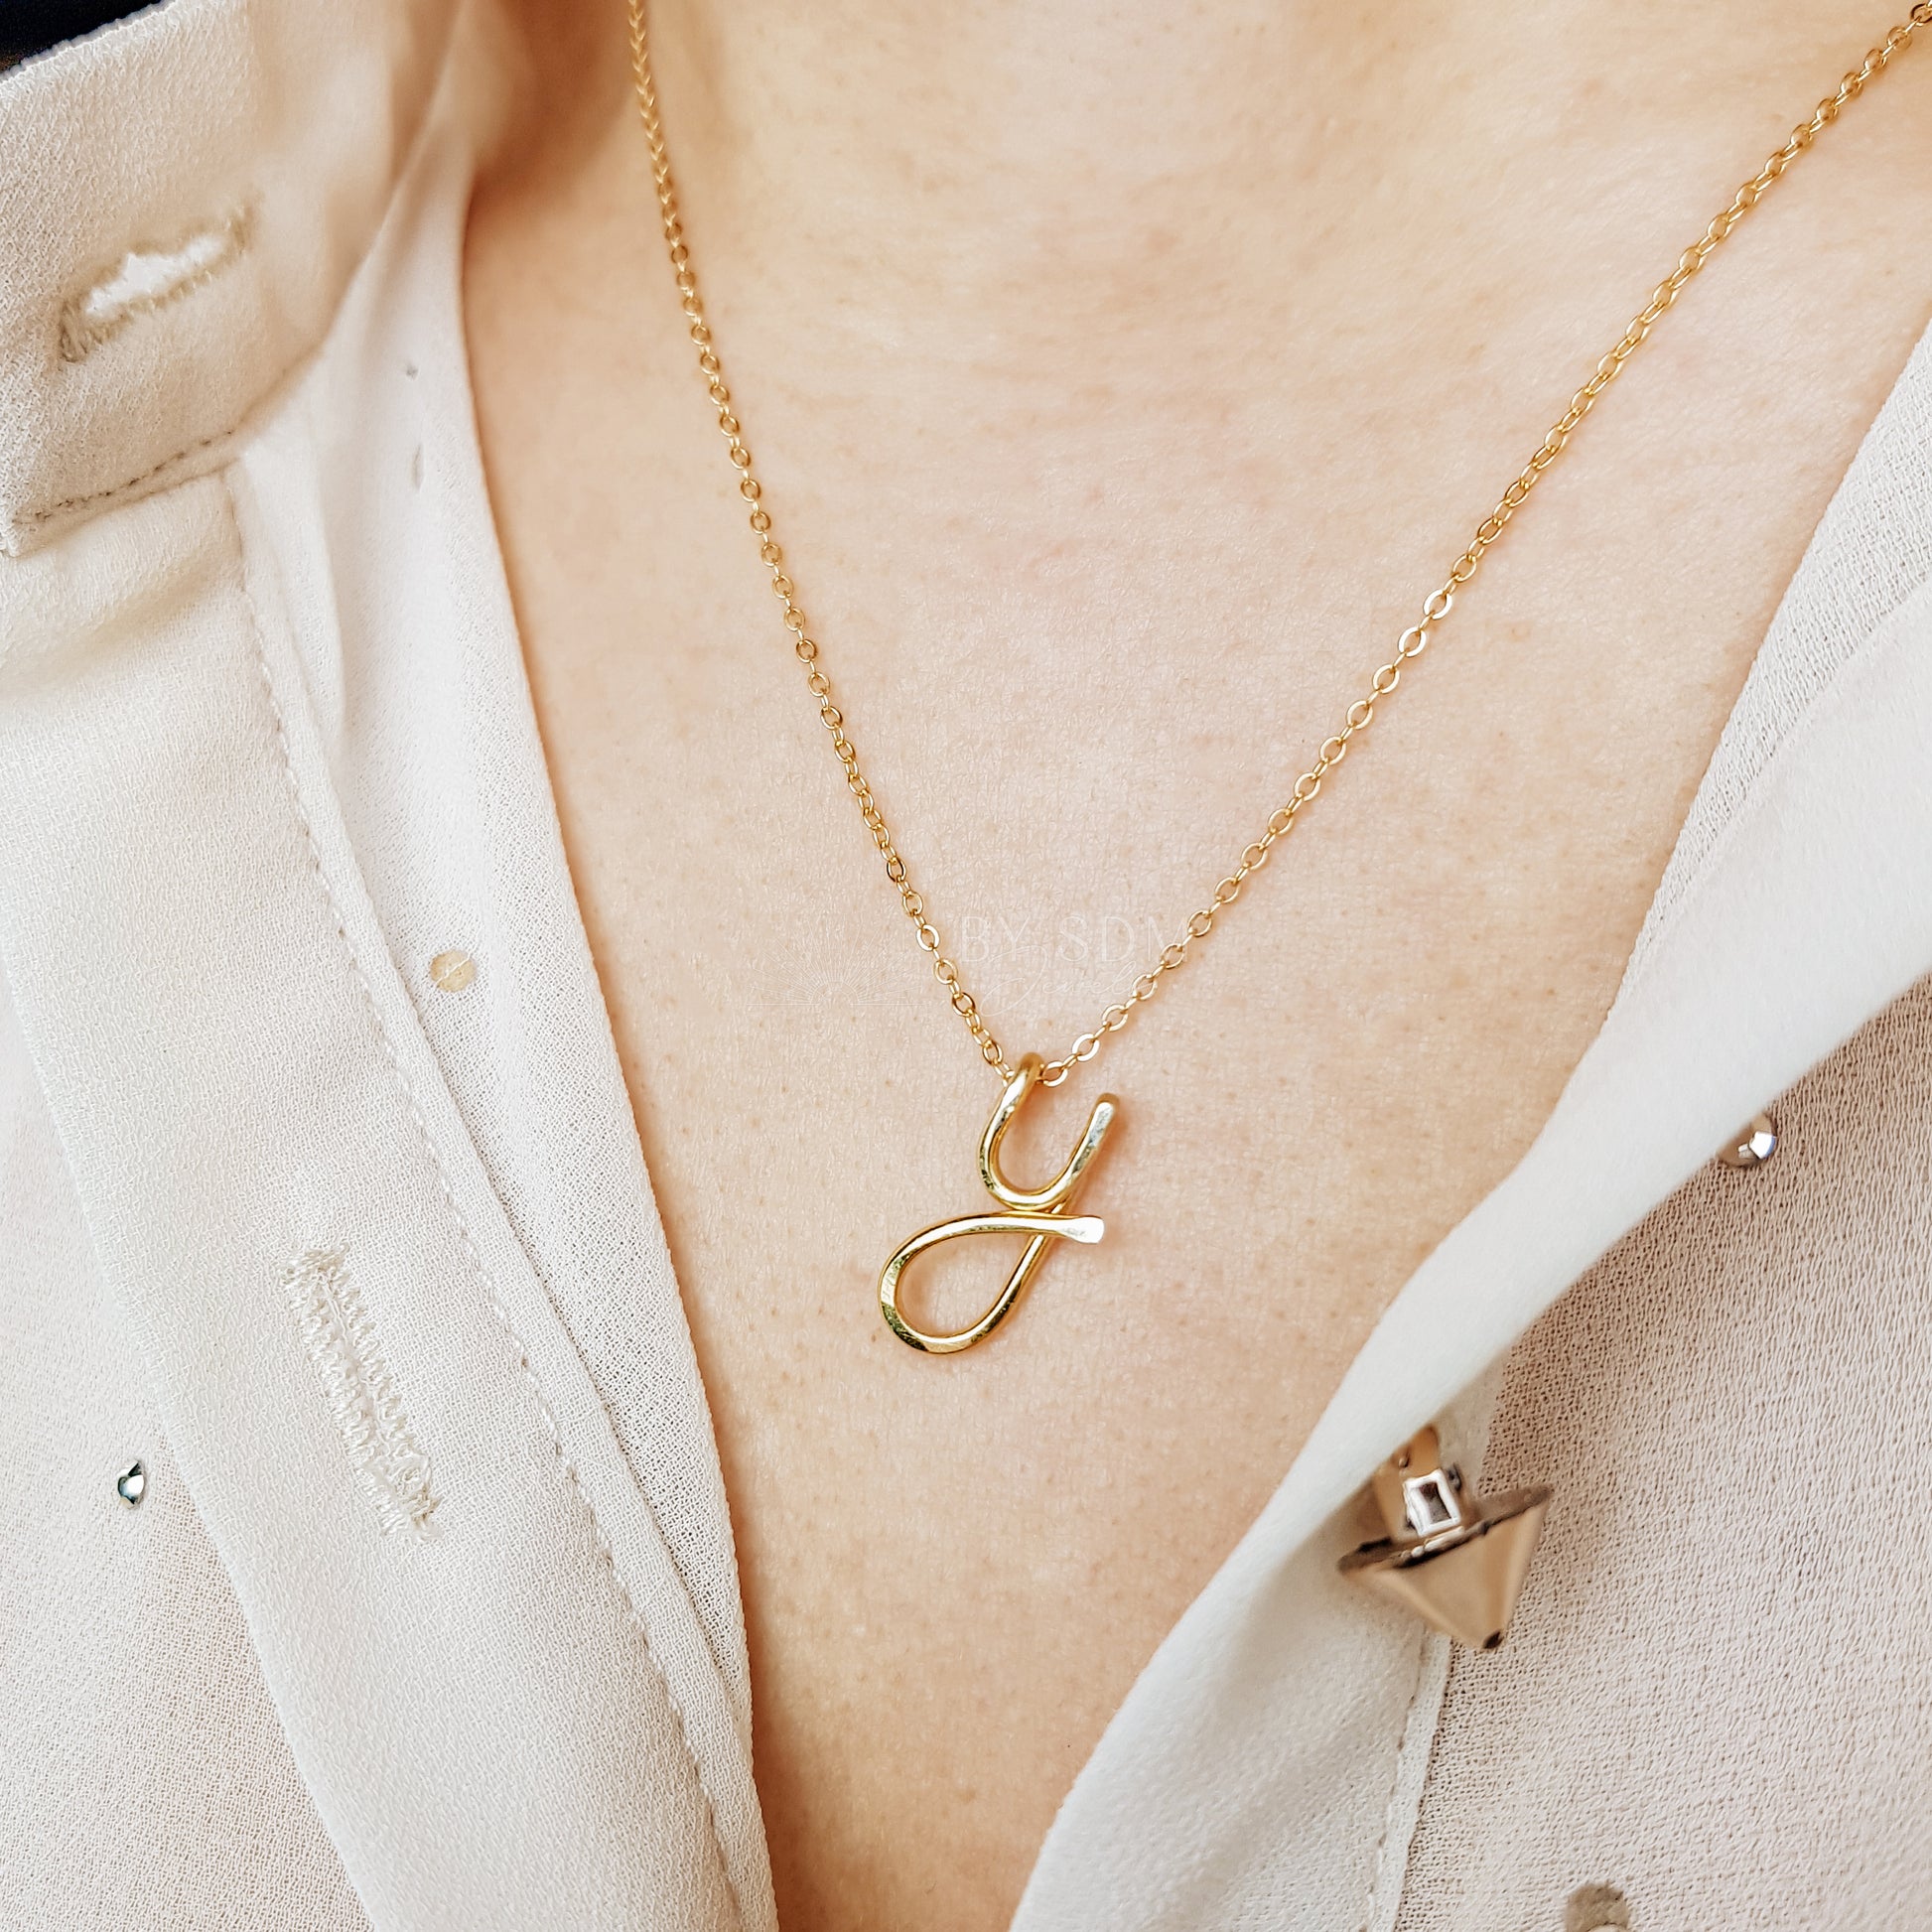 T Initial Necklace • Personalized Name Necklace • Letter Necklace • Gold Necklace • Wife Gifts • Gifts For Mom • Moms Gift • Birthday Gift